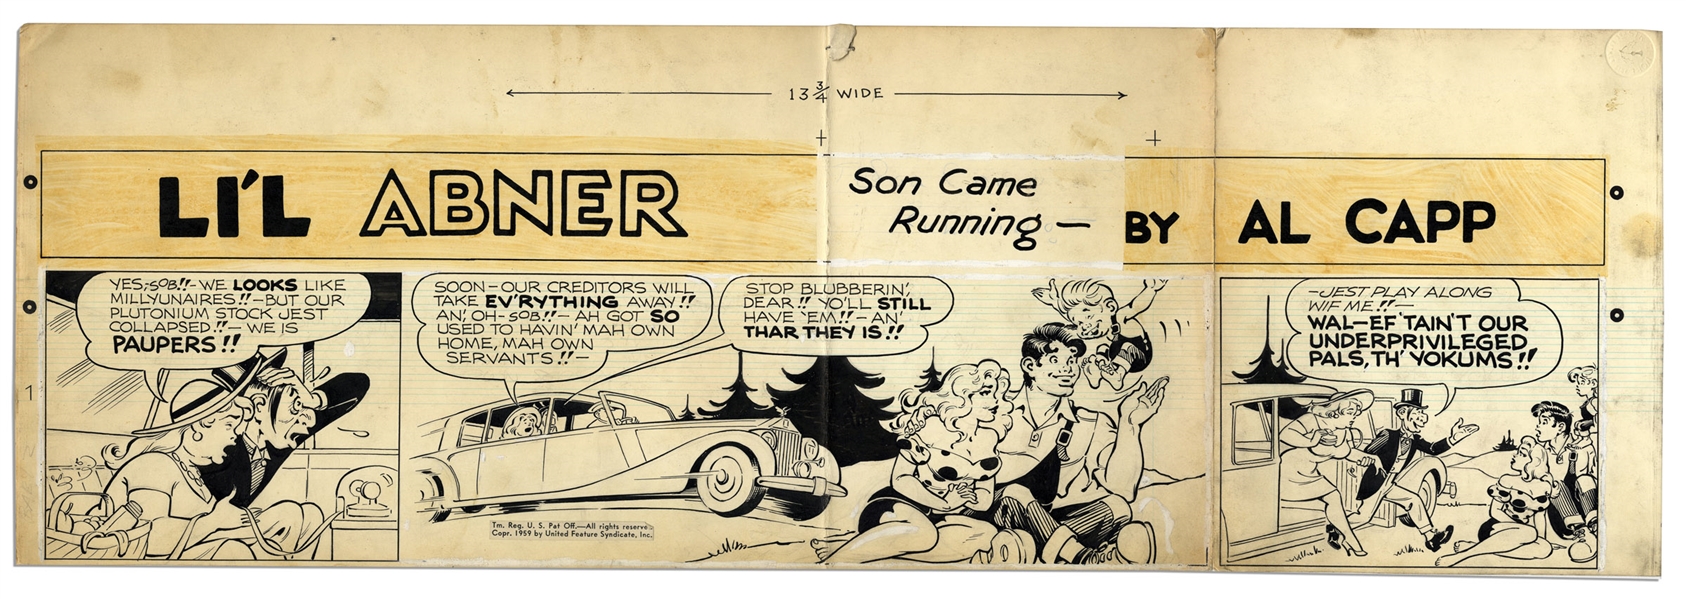 ''Li'l Abner'' Sunday Strip Hand-Drawn by Al Capp From 19 July 1959 -- Featuring Abner, Daisy Mae & Honest Abe -- 29'' x 9.75'' -- Toning & Creasing, Very Good -- From the Al Capp Estate